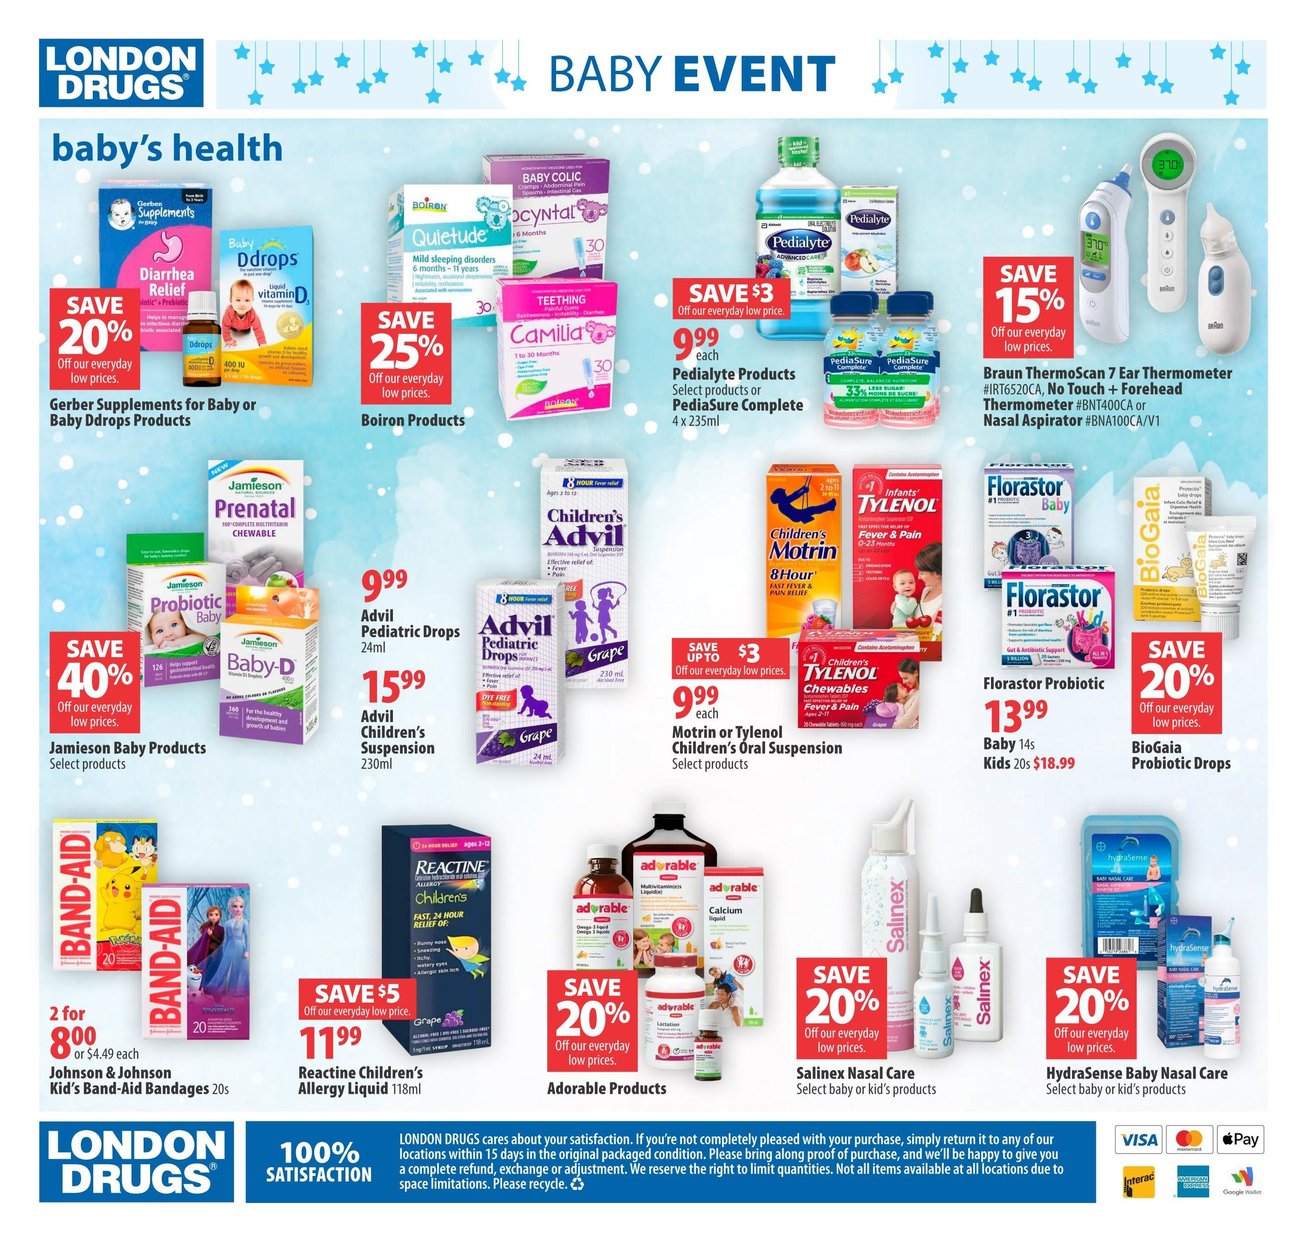 London Drugs - Baby Event - Page 9